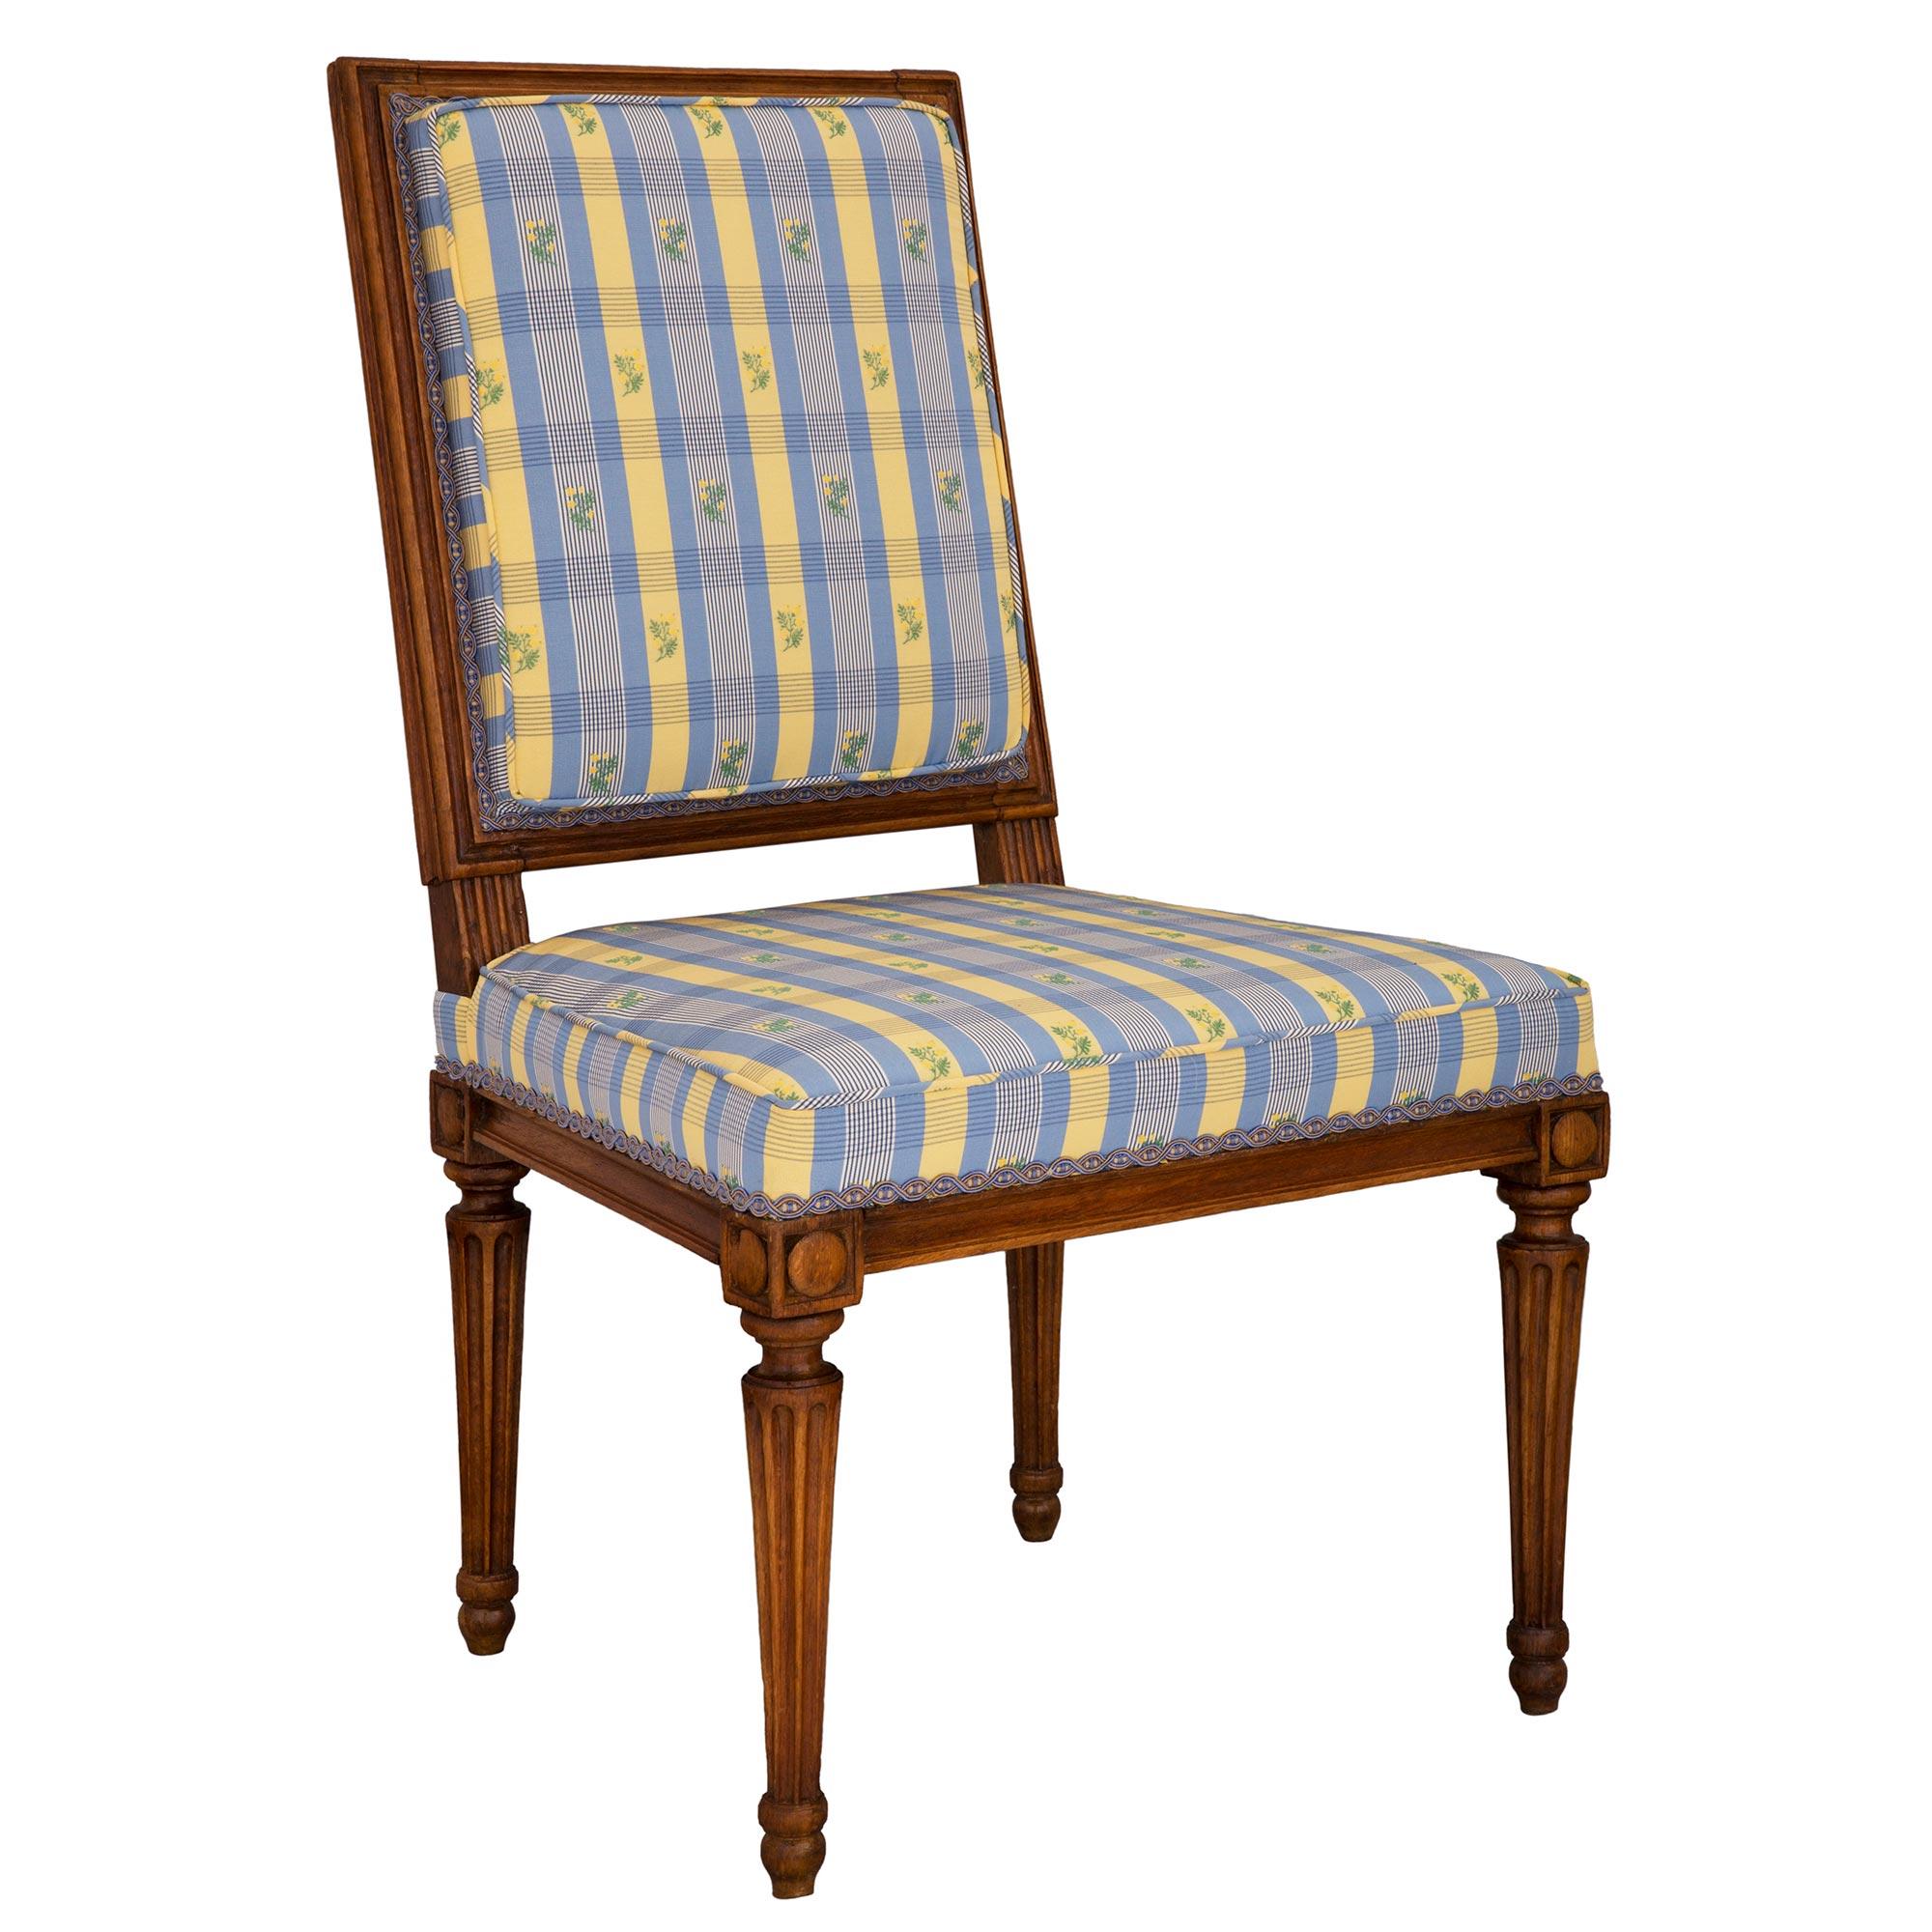 An elegant French 19th century Louis XVI st. Beechwood chair. The chair is raised by fine circular tapered fluted legs with lovely topie shaped feet. Above each leg are carved block reserves which center the straight apron with a fine mottled